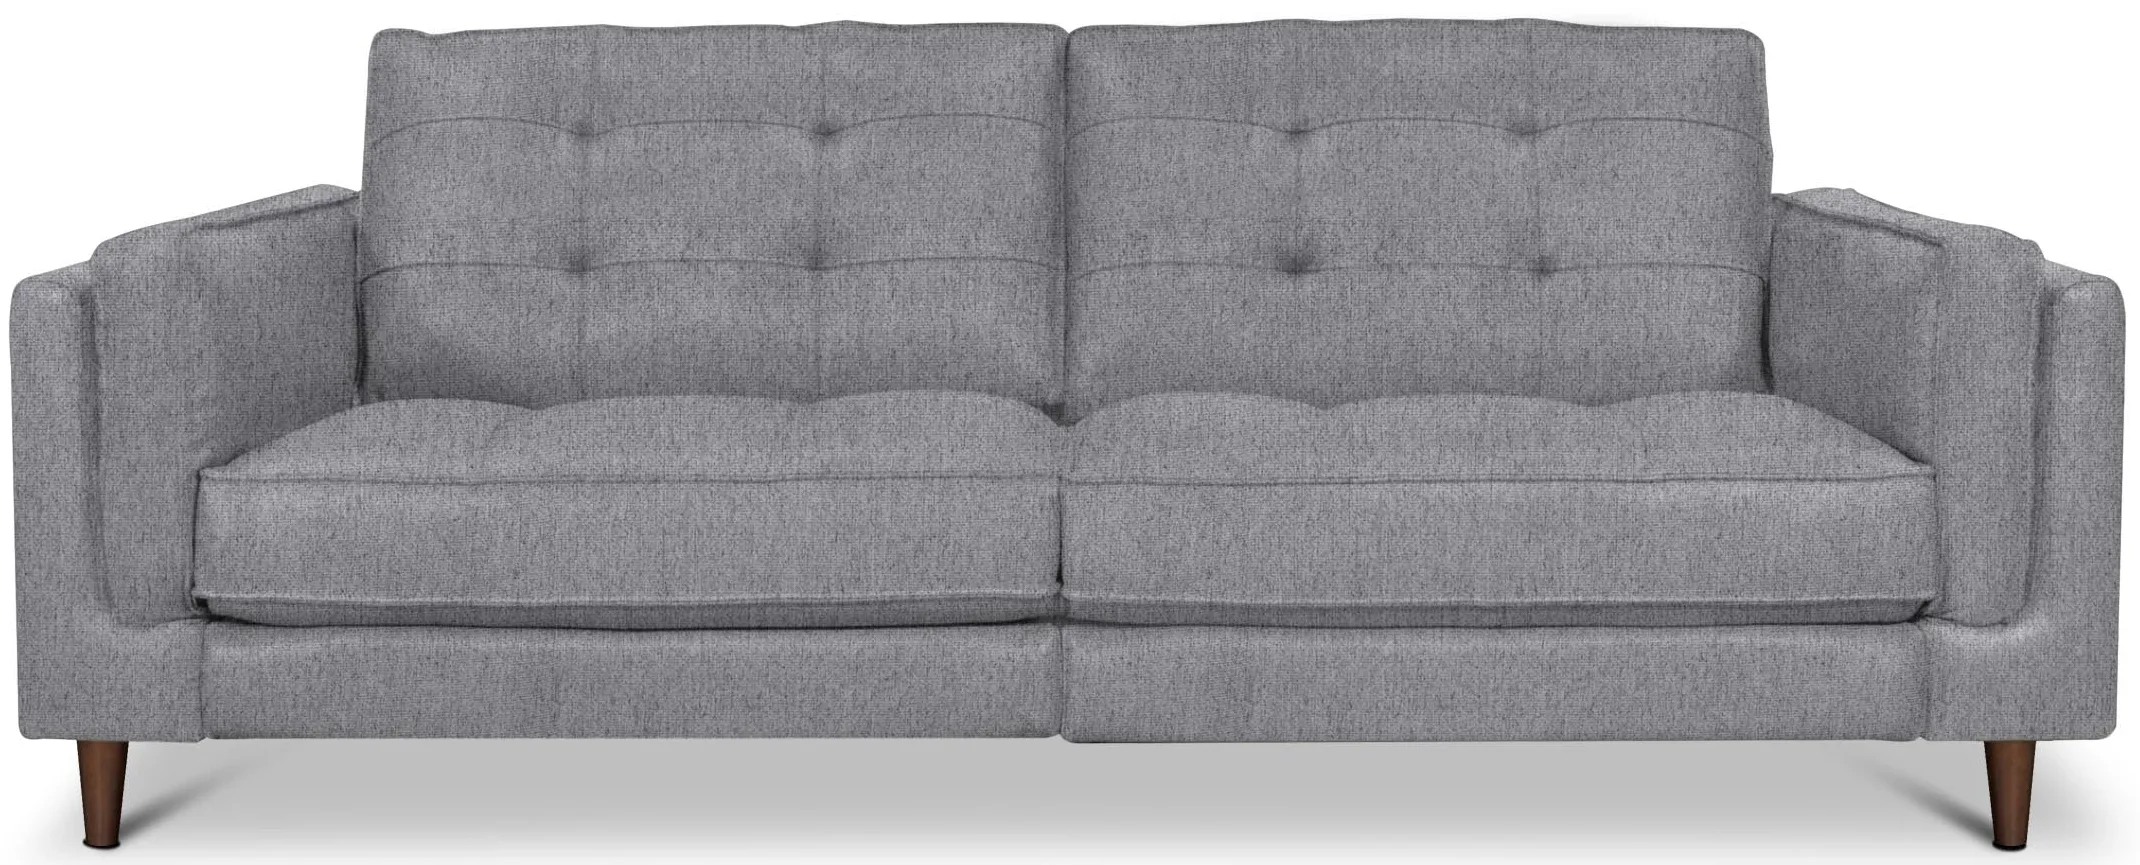 Keating Sofa with Power Footrests